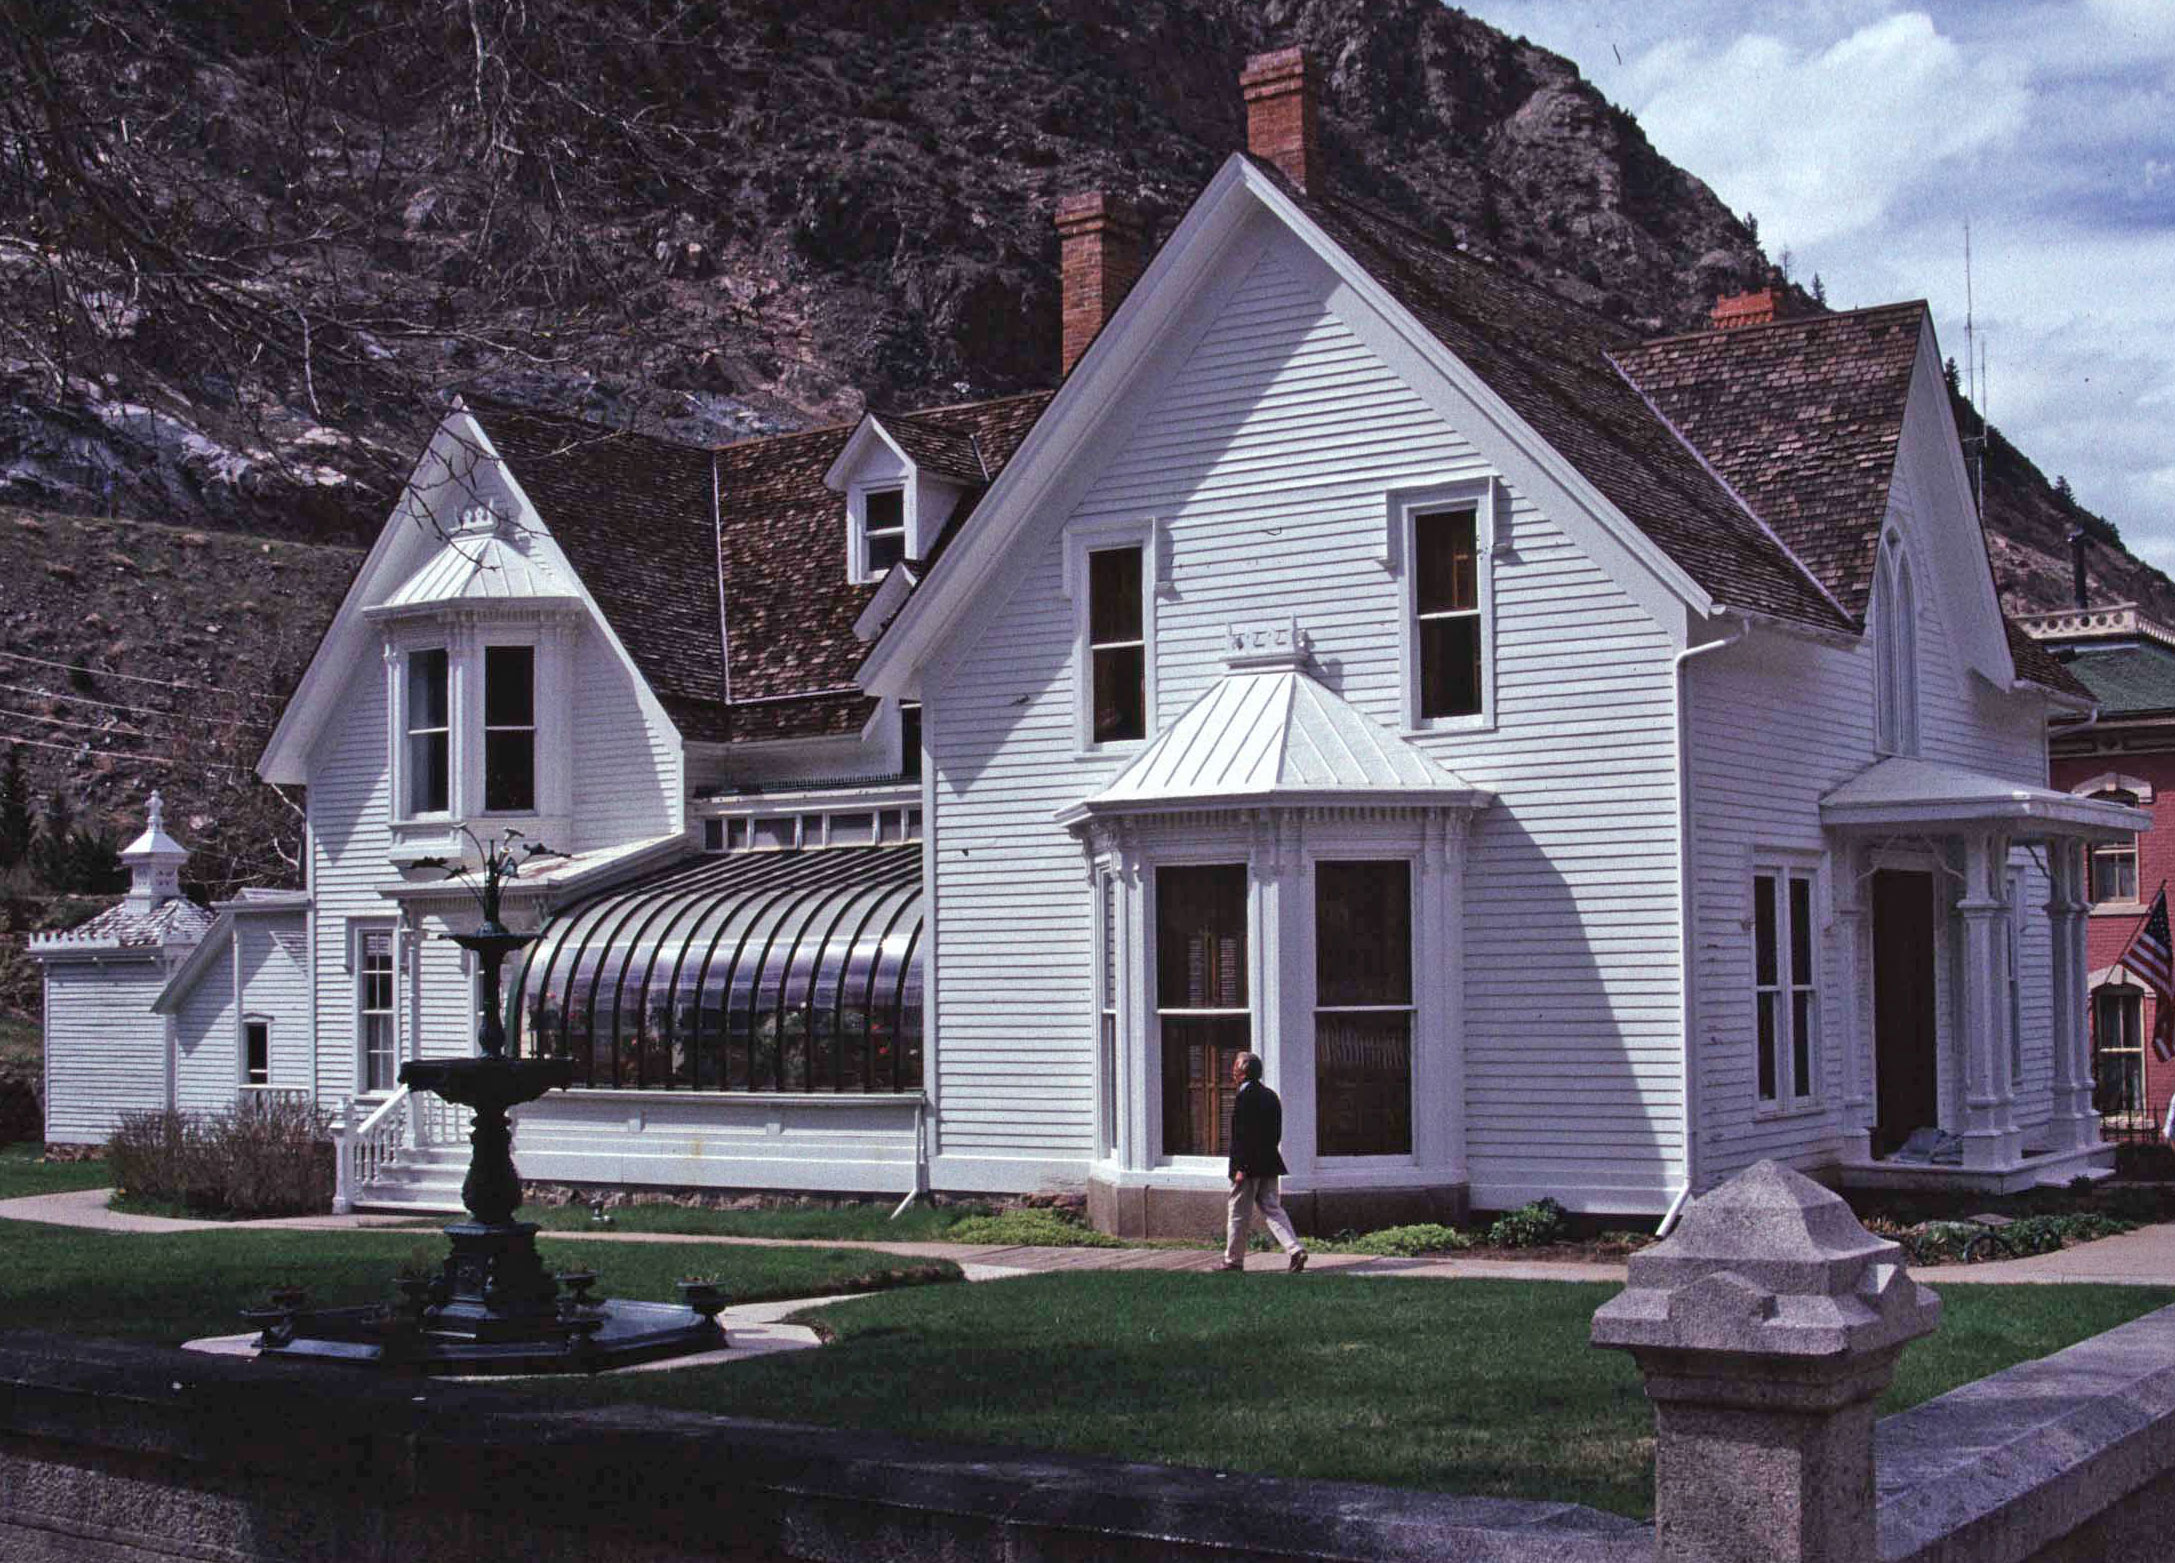 The Hamill House, Georgetown, is an example of the Carpenter Gothic style.